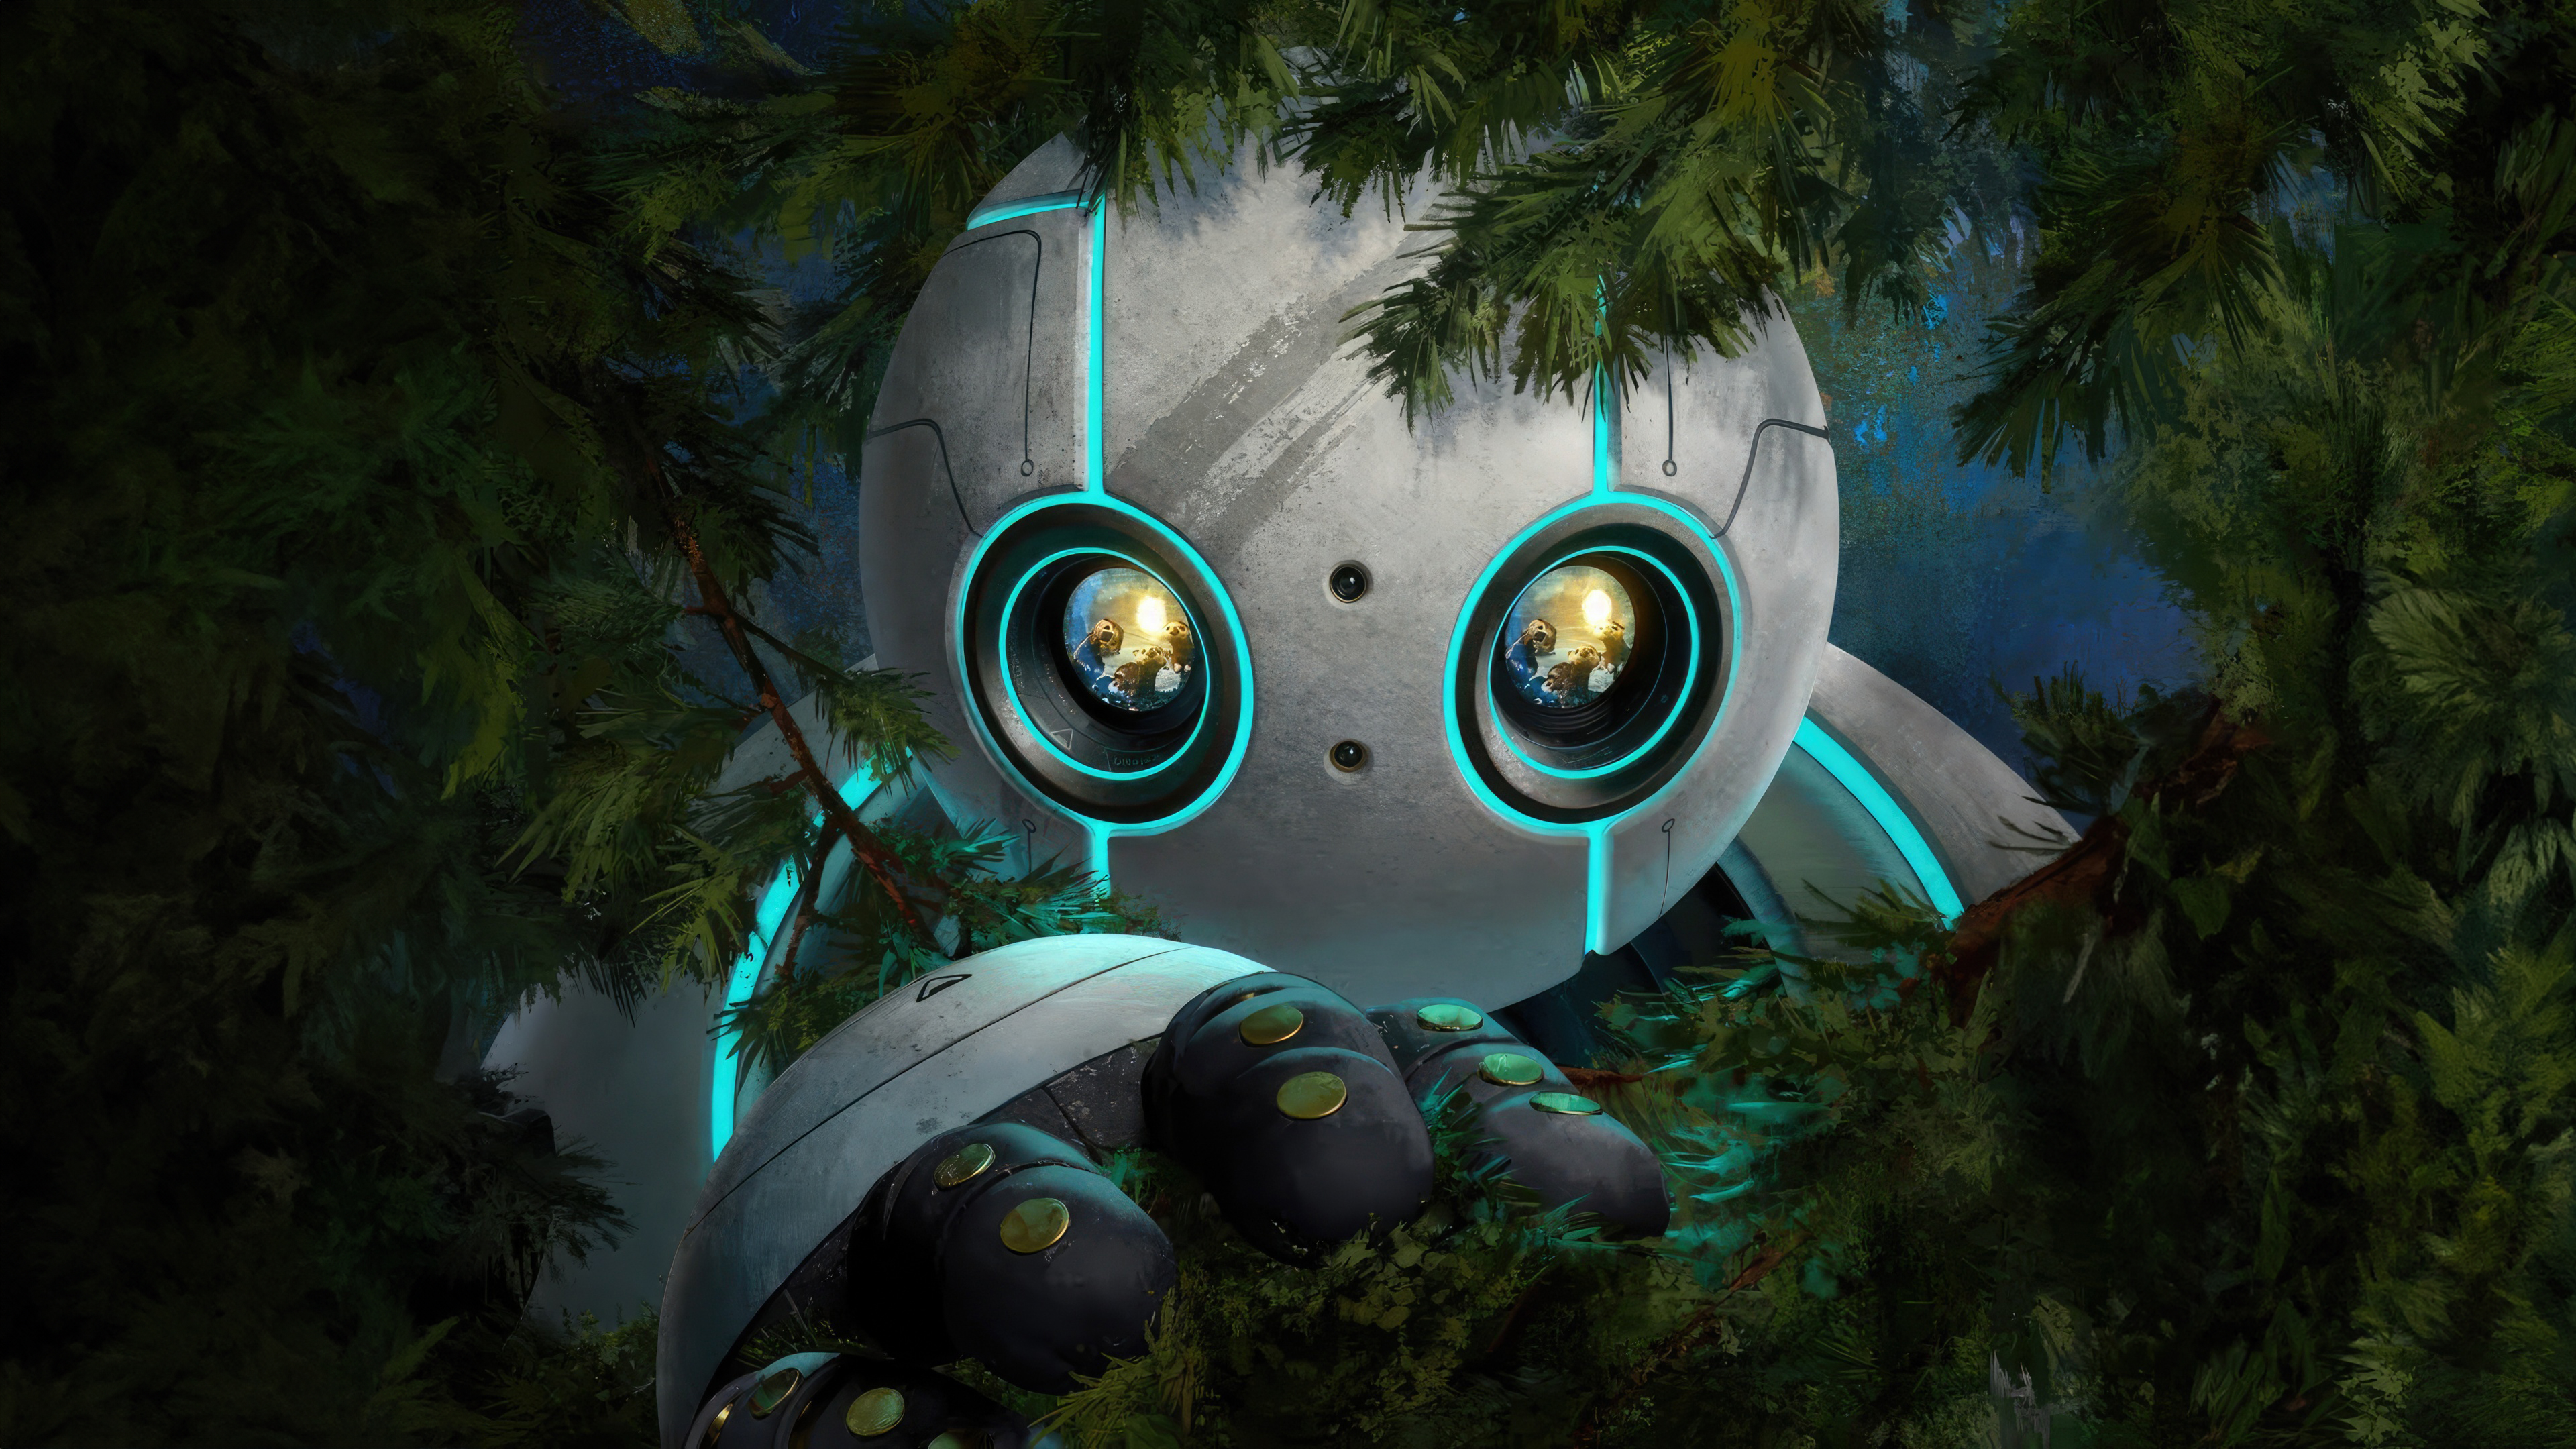 General 3840x2160 The Wild Robot digital art illustration robot movie characters 4K trees nature